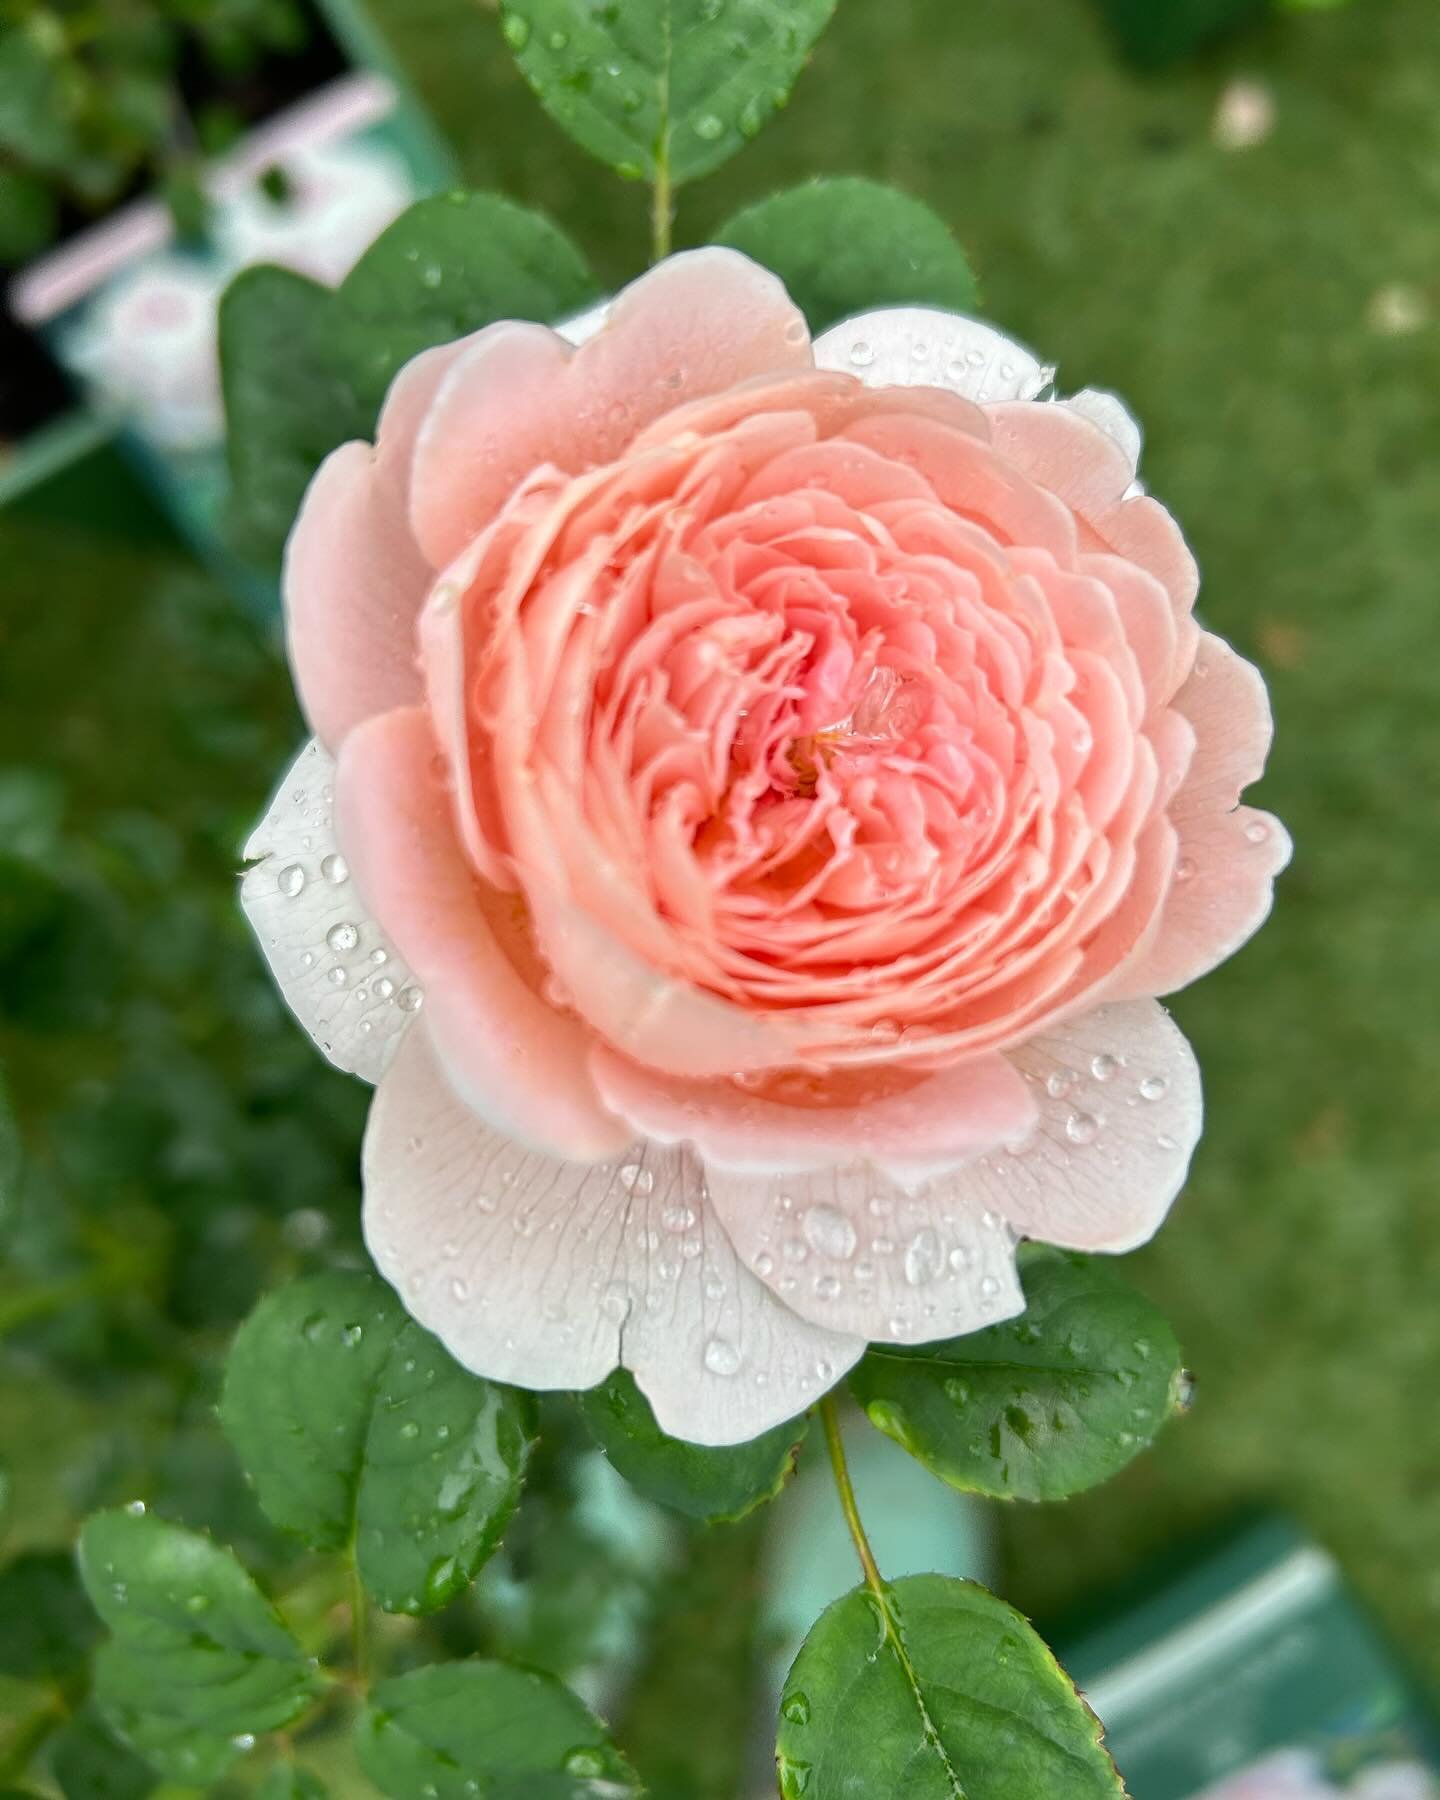 😍Our David Austin roses are starting to bloom! Come and smell them, they are amazingly fragrant!

#davidaustinroses #blooms #roses #rosegarden #gardening #newgardengazebo #shoplocalgso #greensboro